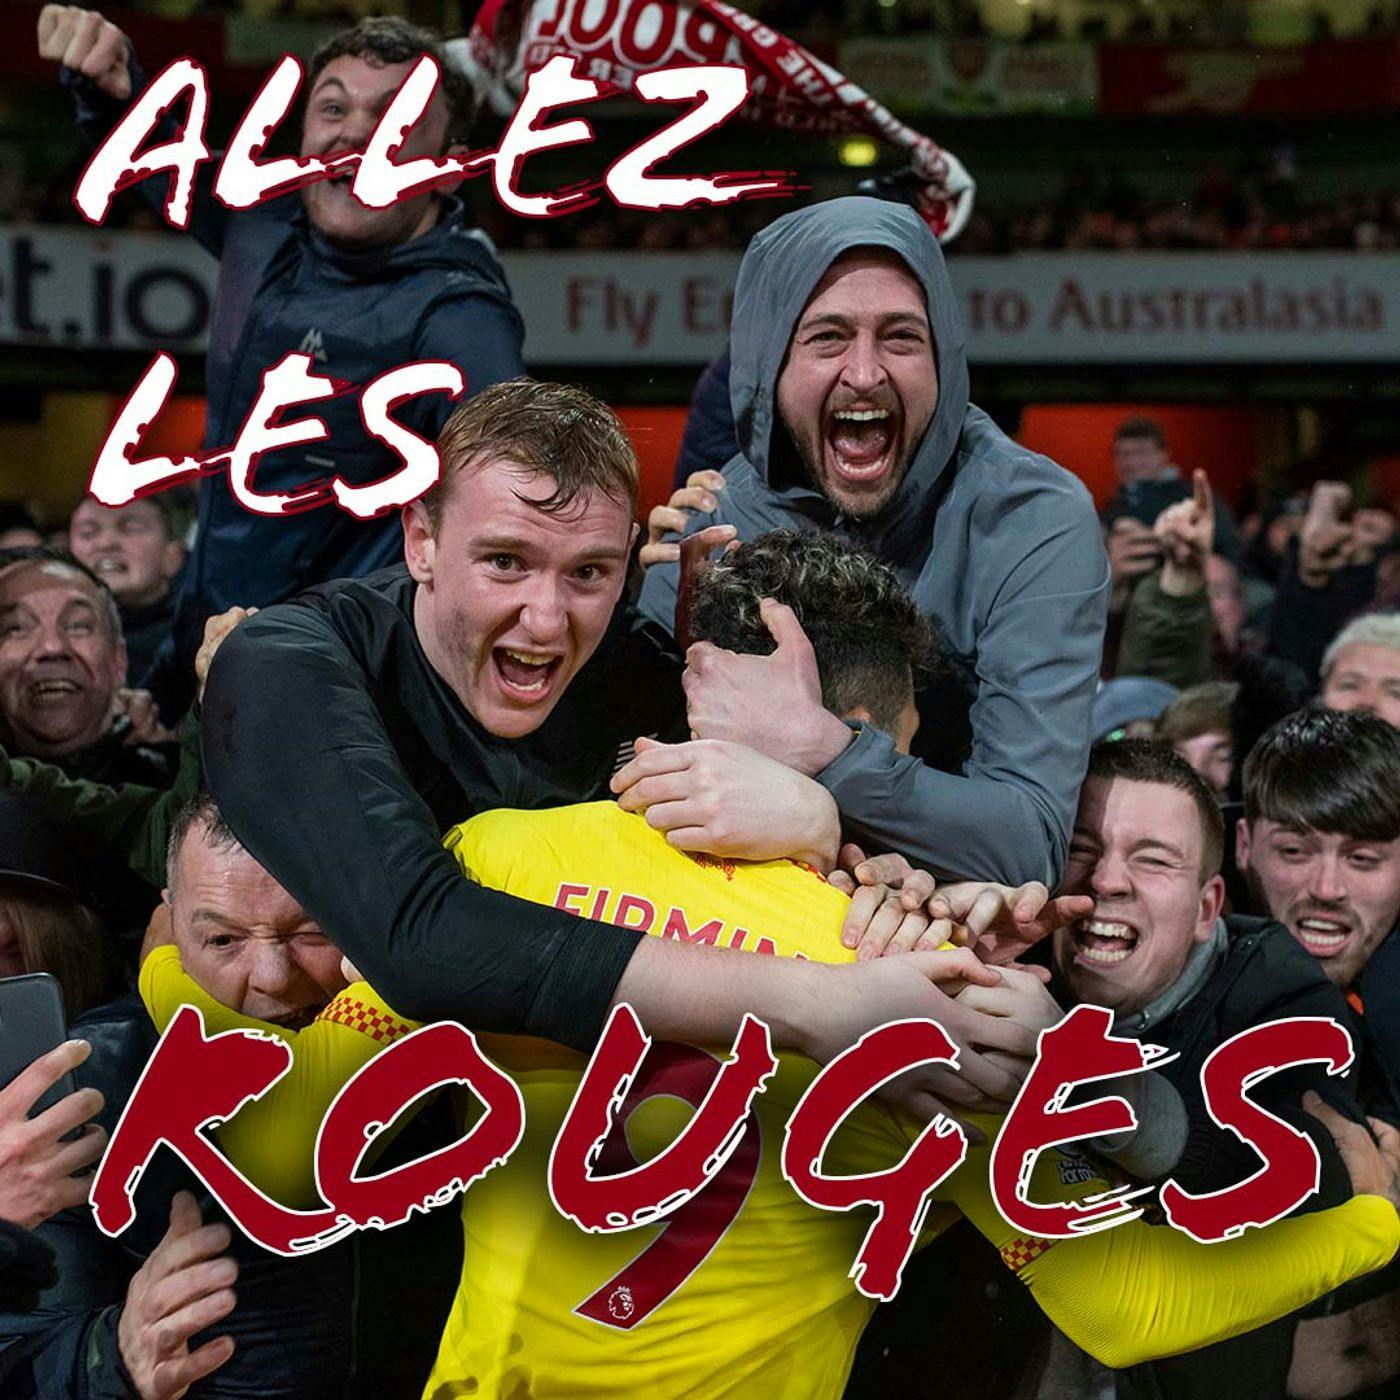 Allez Les Rouges: The Reds in fine form, Champions League Draw & Wembley within reach?